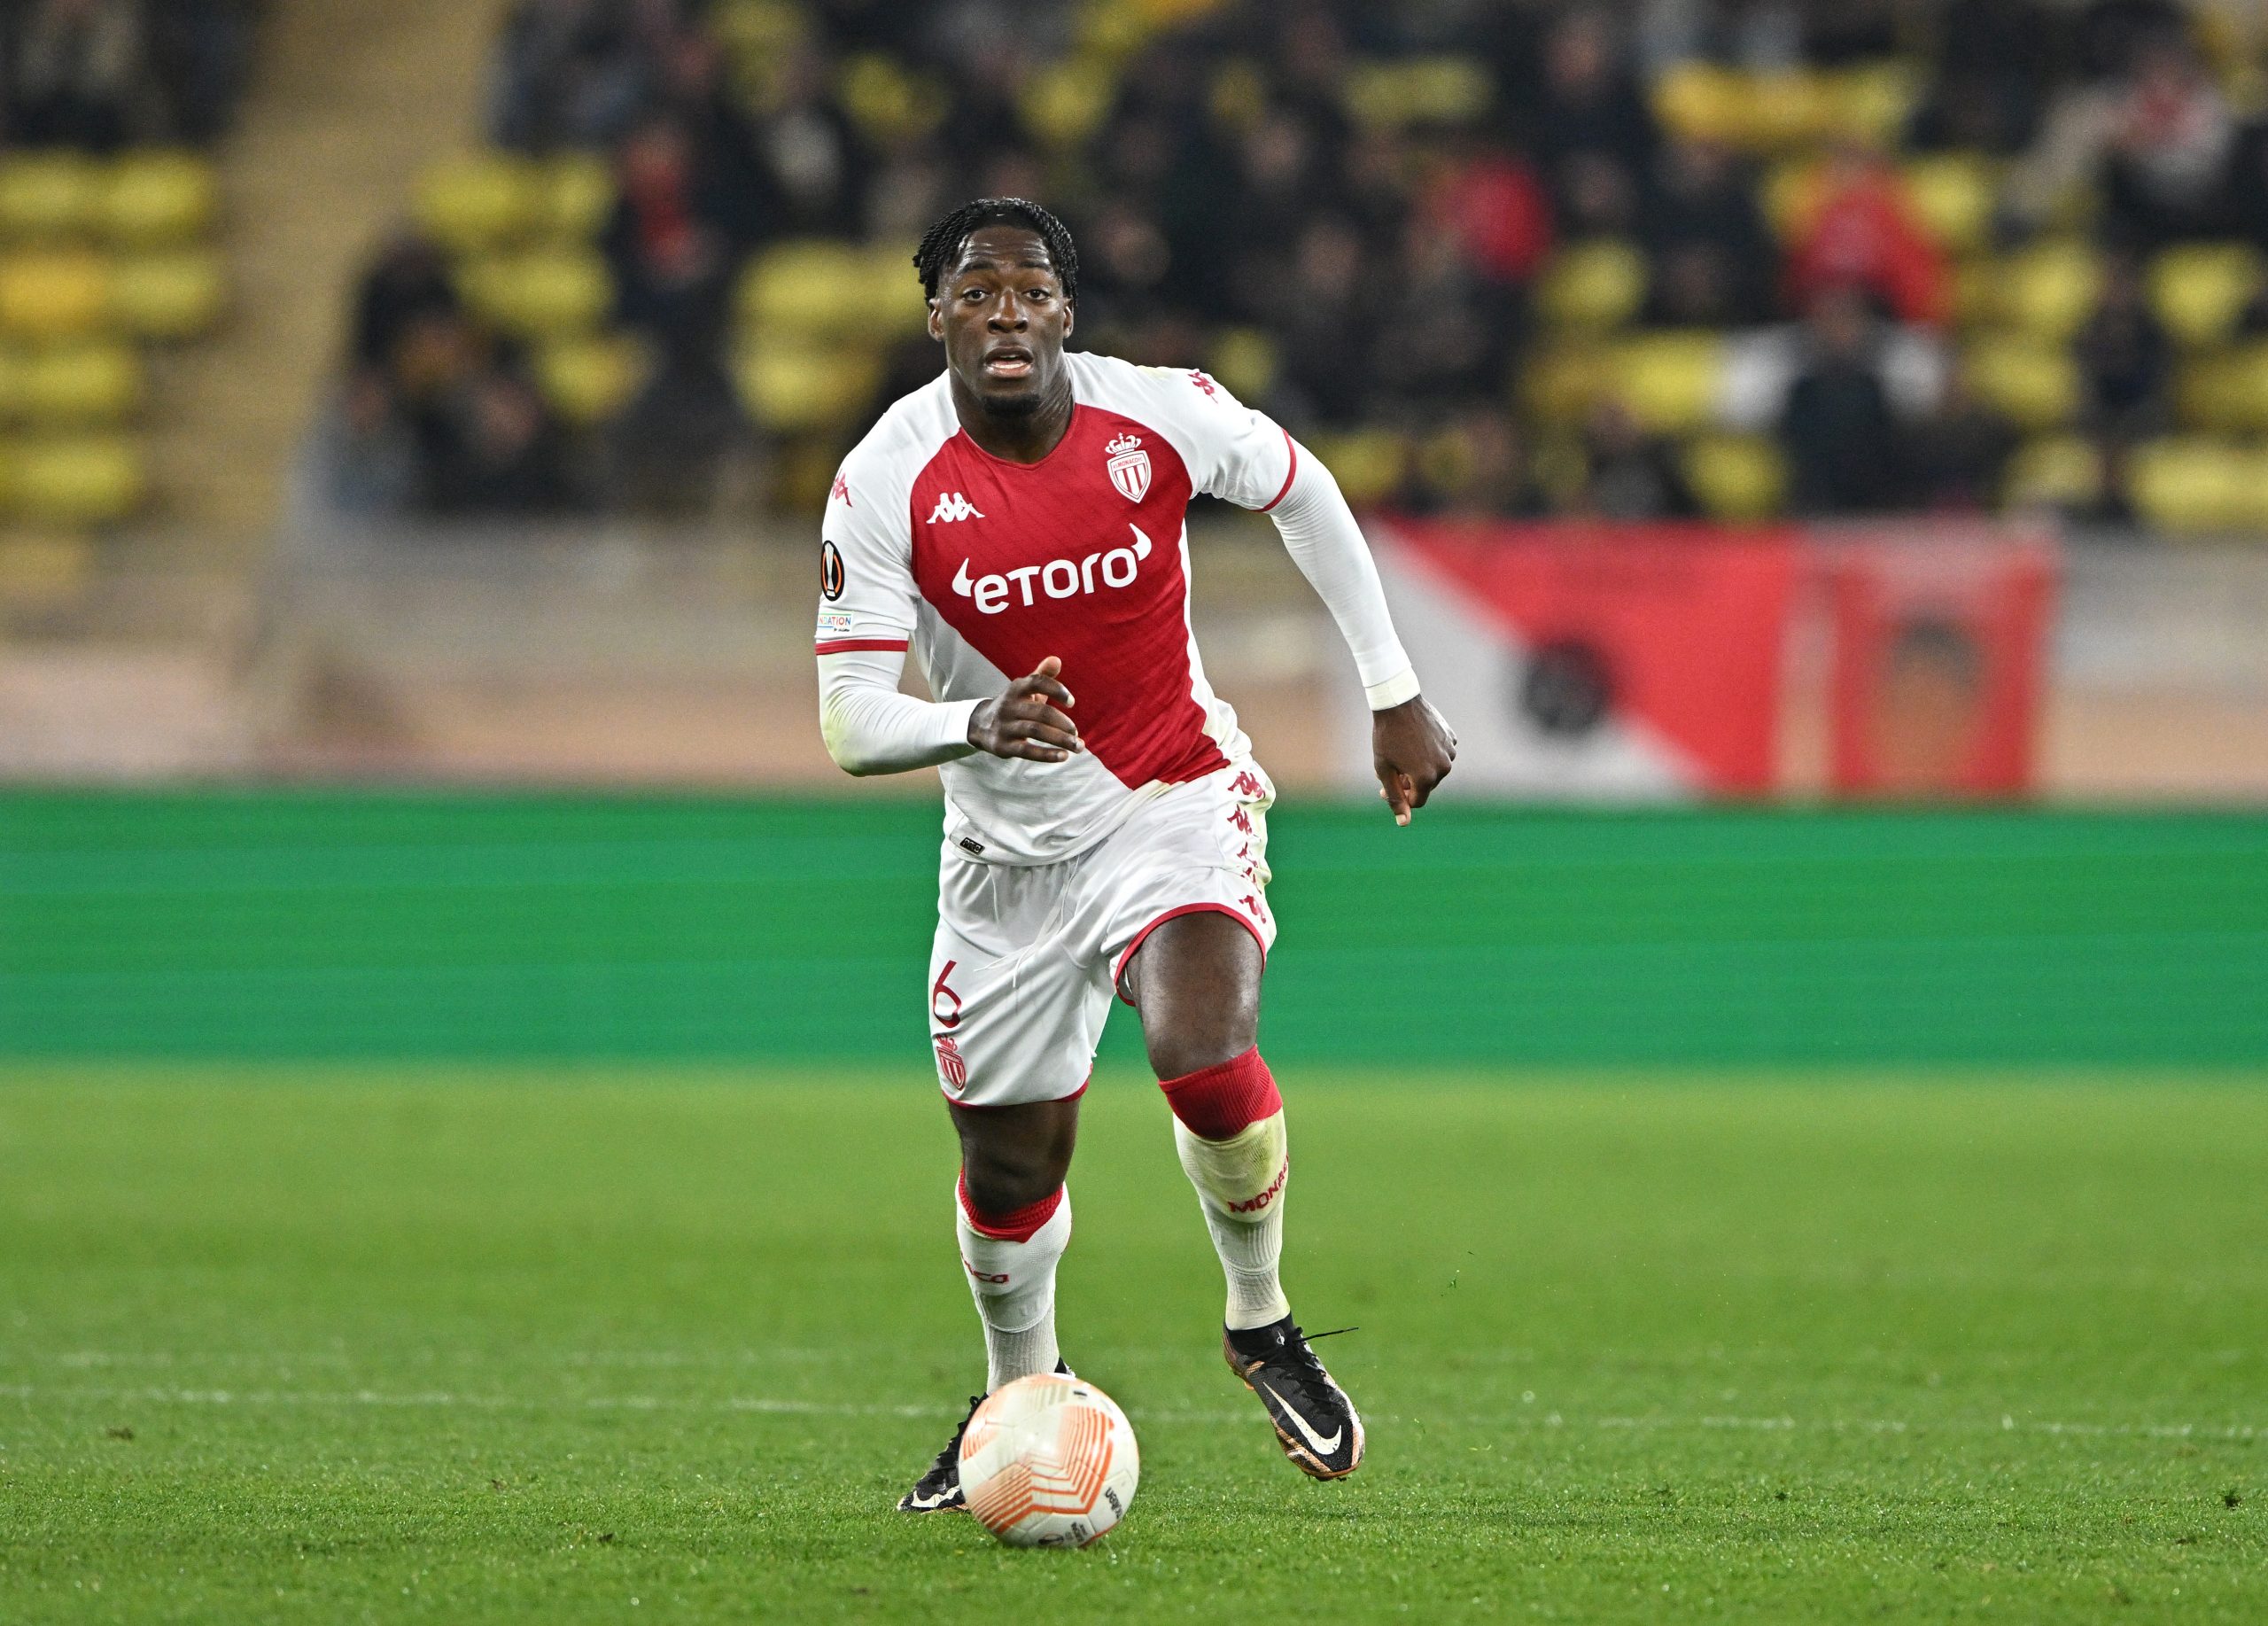 MONACO, MONACO - FEBRUARY 23: Axel Disasi of AS Monaco runs with the ball during the UEFA Europa League knockout round play-off leg two match between AS Monaco and Bayer 04 Leverkusen at Stade Louis II on February 23, 2023 in Monaco, Monaco. (Photo by Chris Ricco/Getty Images)